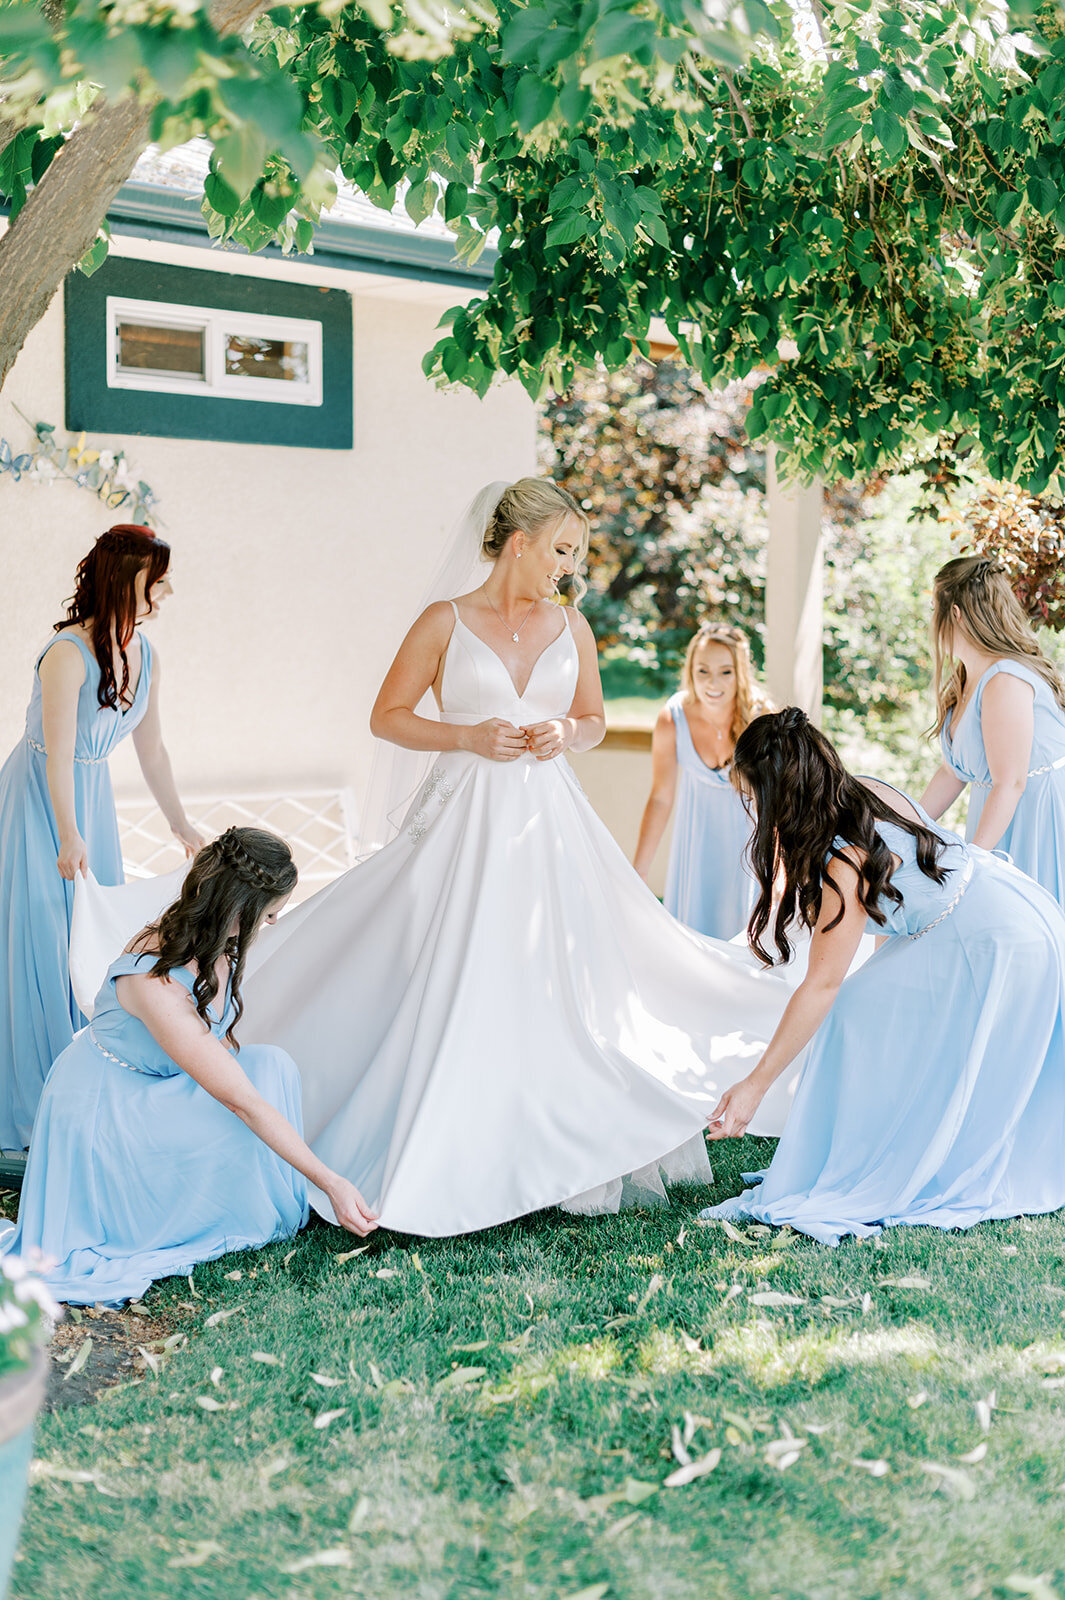 Getting ready with bridesmaids at Boise wedding venue Honalee Farms taken by the Best Boise Wedding Photographers